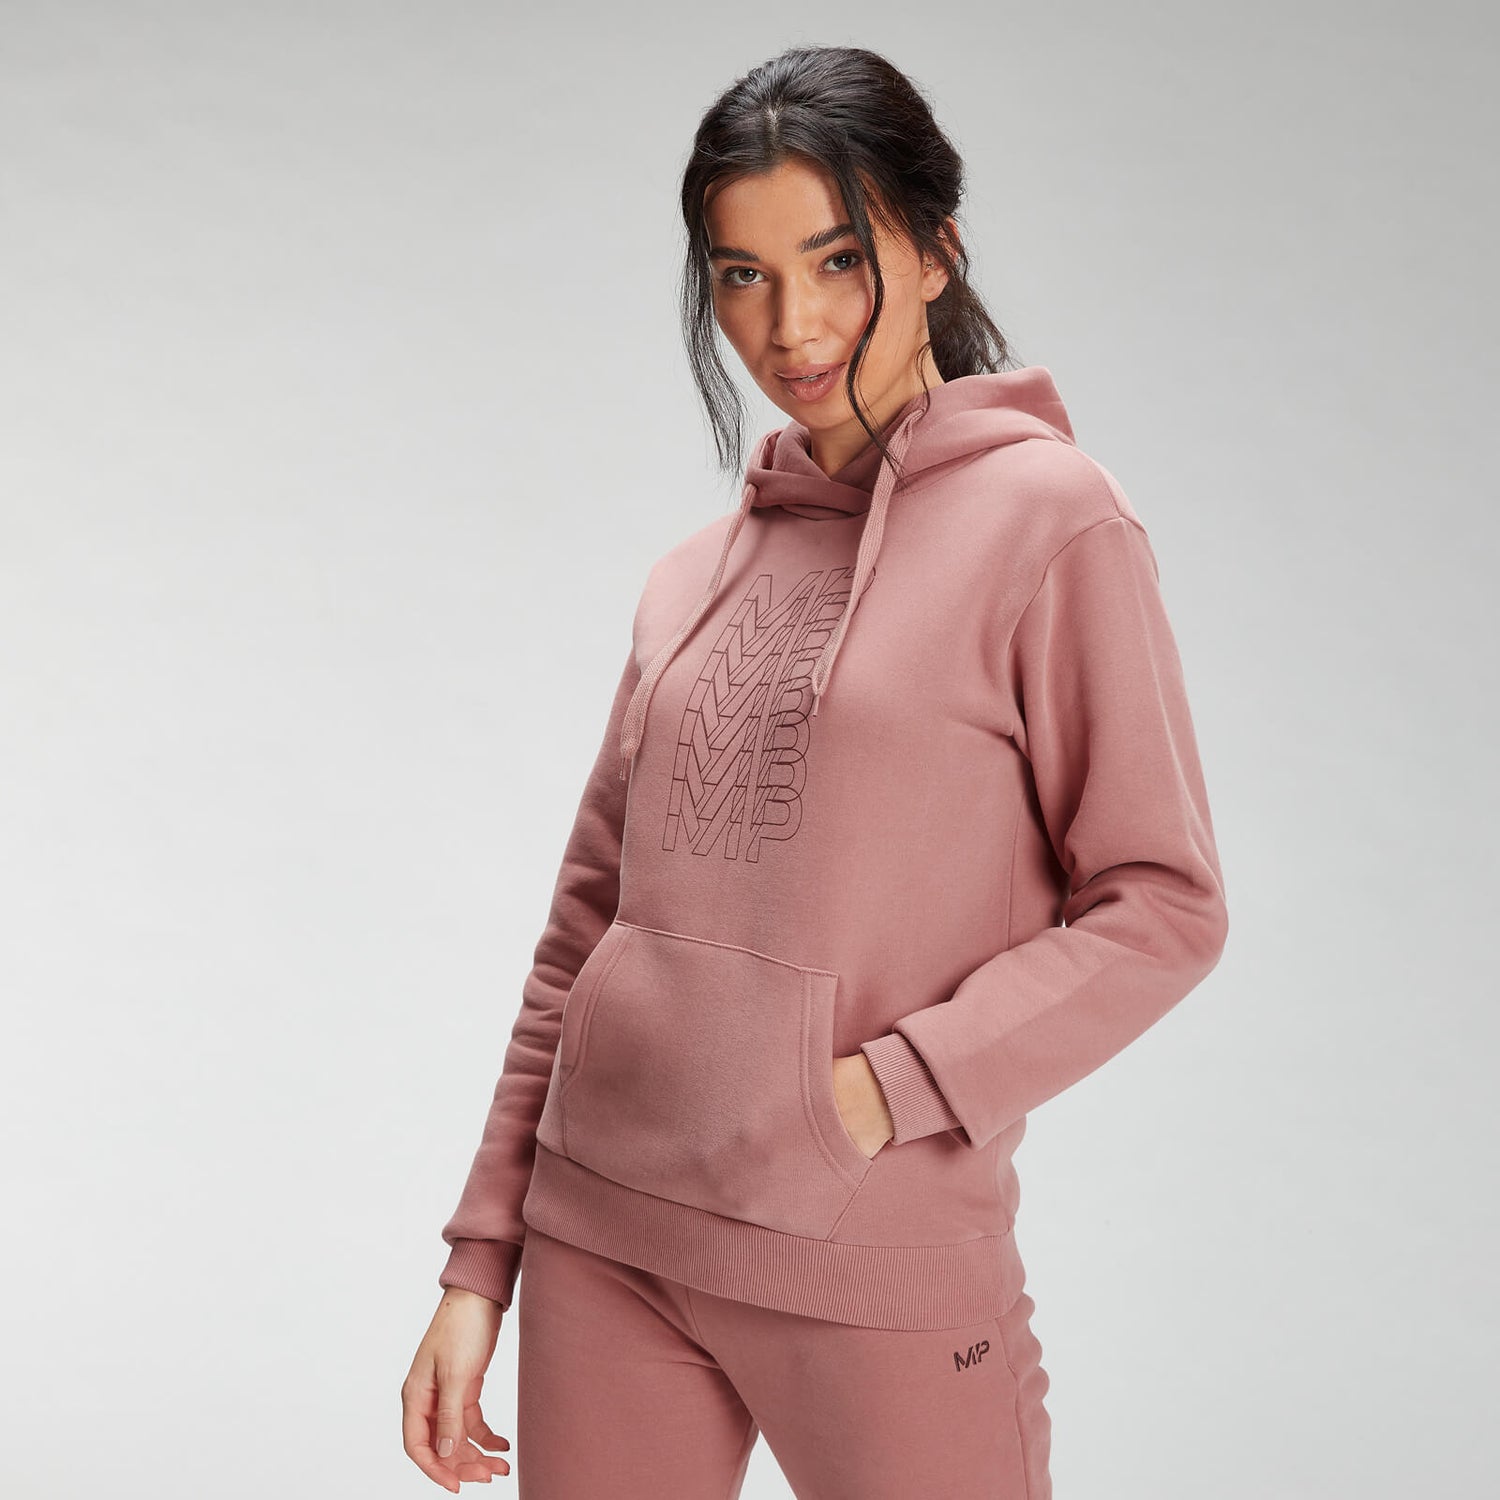 MP Women's Repeat MP Hoodie - Dust Pink - XS